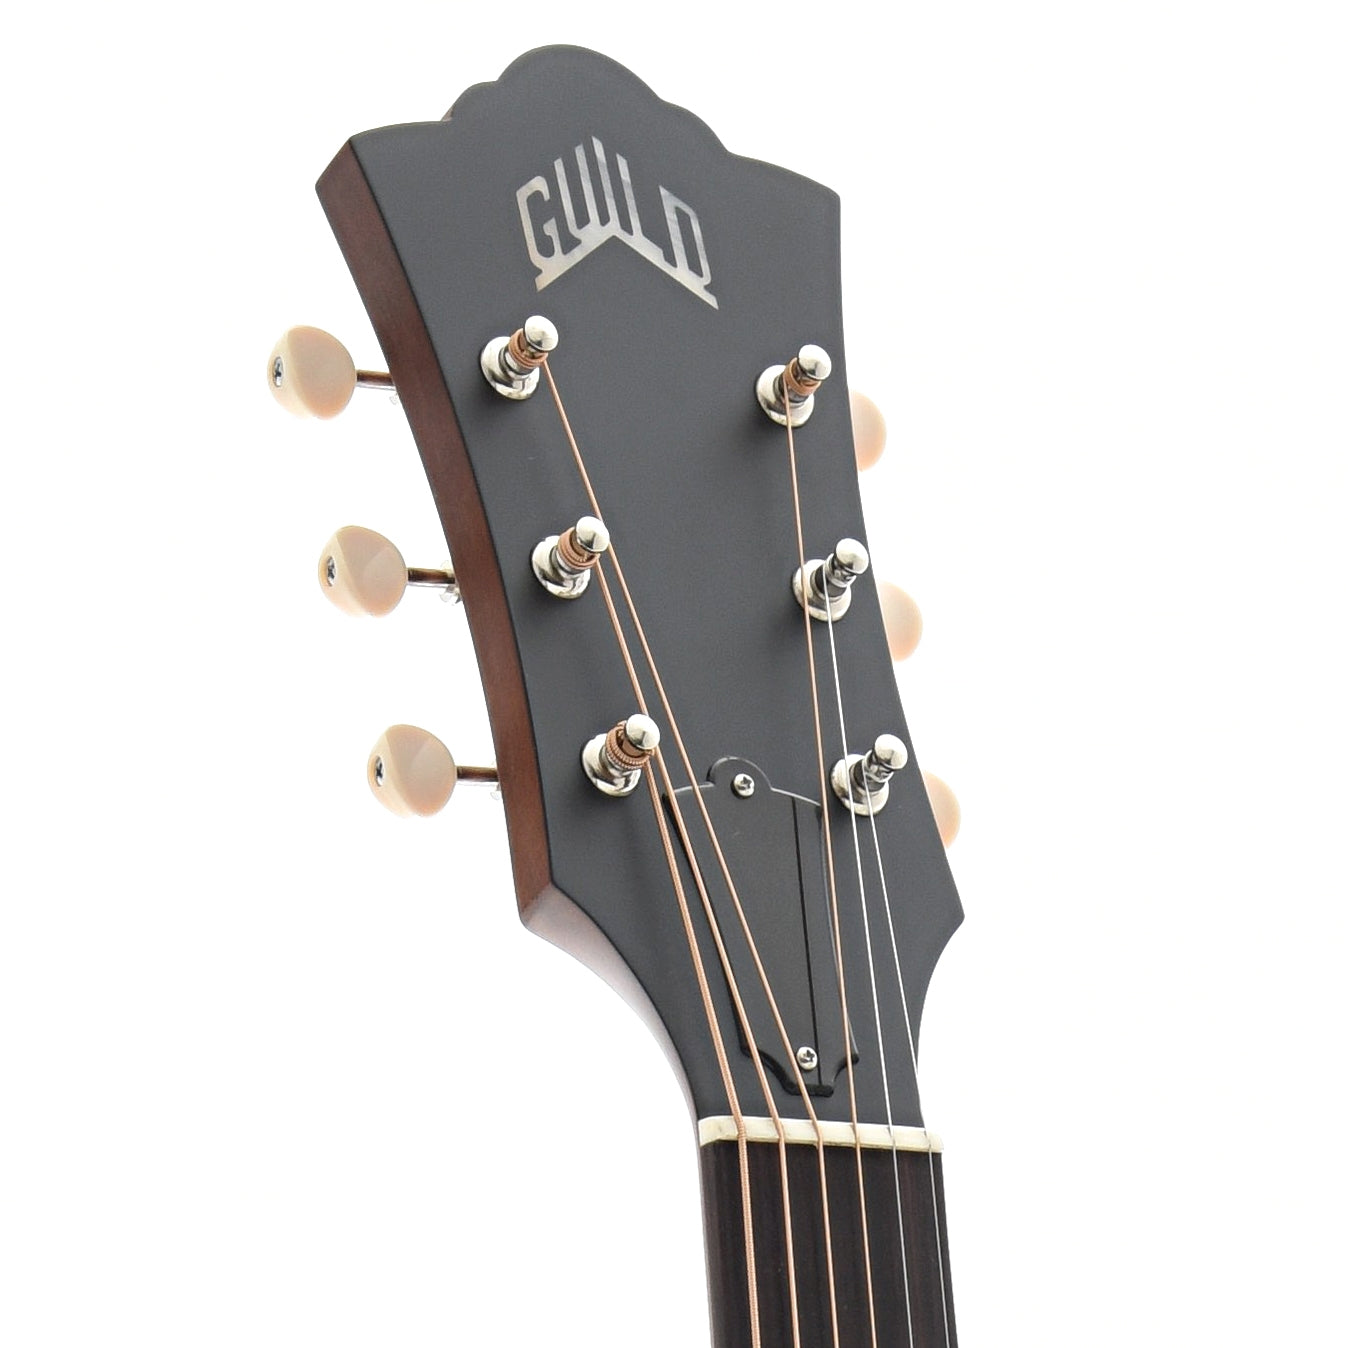 Image 7 of Guild USA D-20 Acoustic Guitar and Case - SKU# GUID20 : Product Type Flat-top Guitars : Elderly Instruments